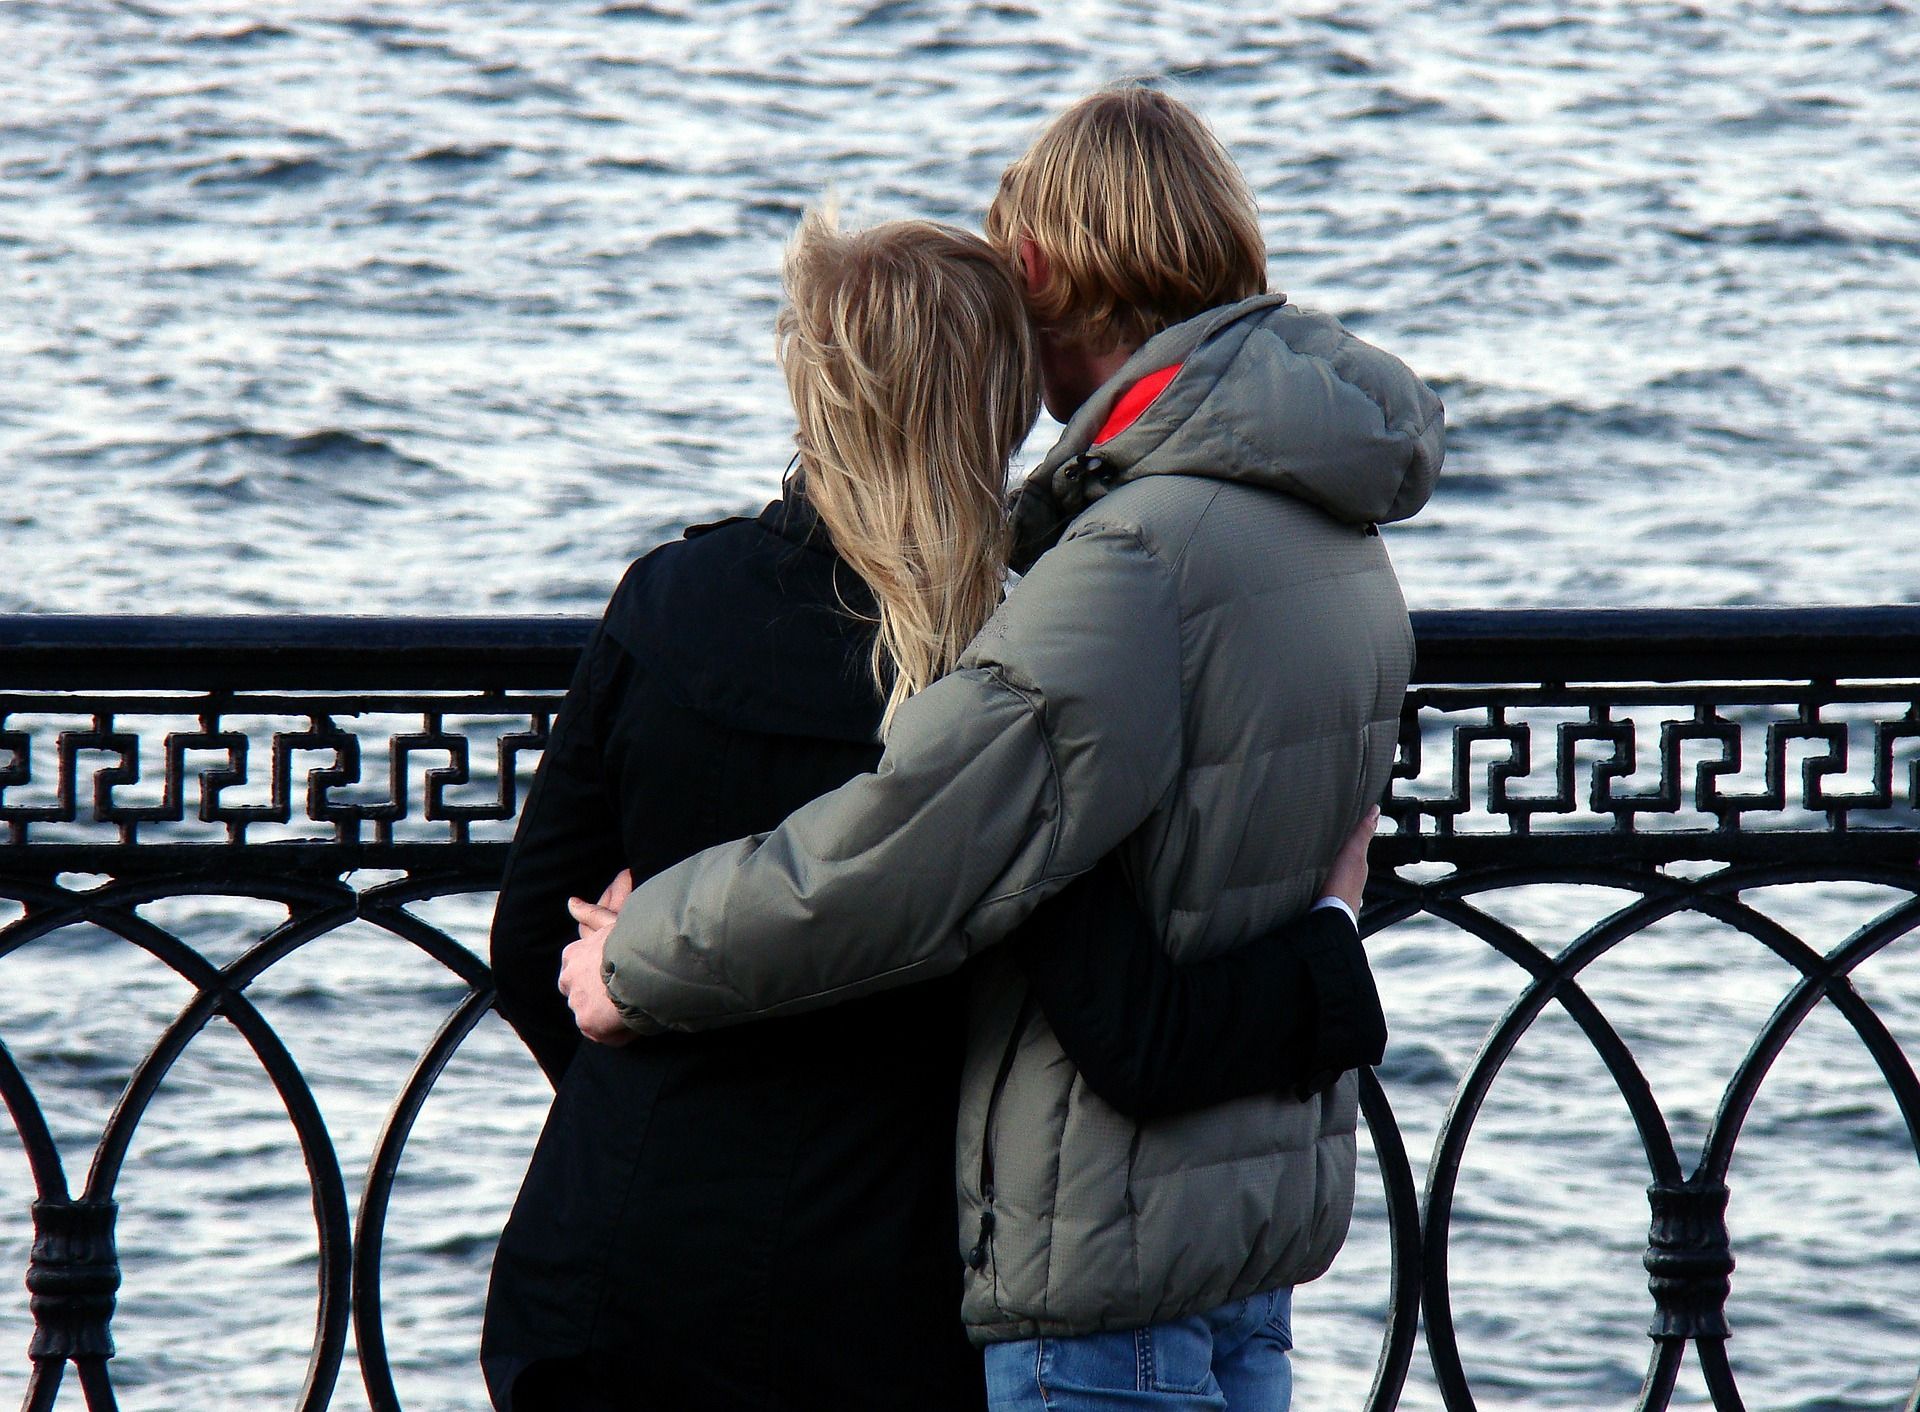 Reunited soon: Denmark allows entry to lovers from EU